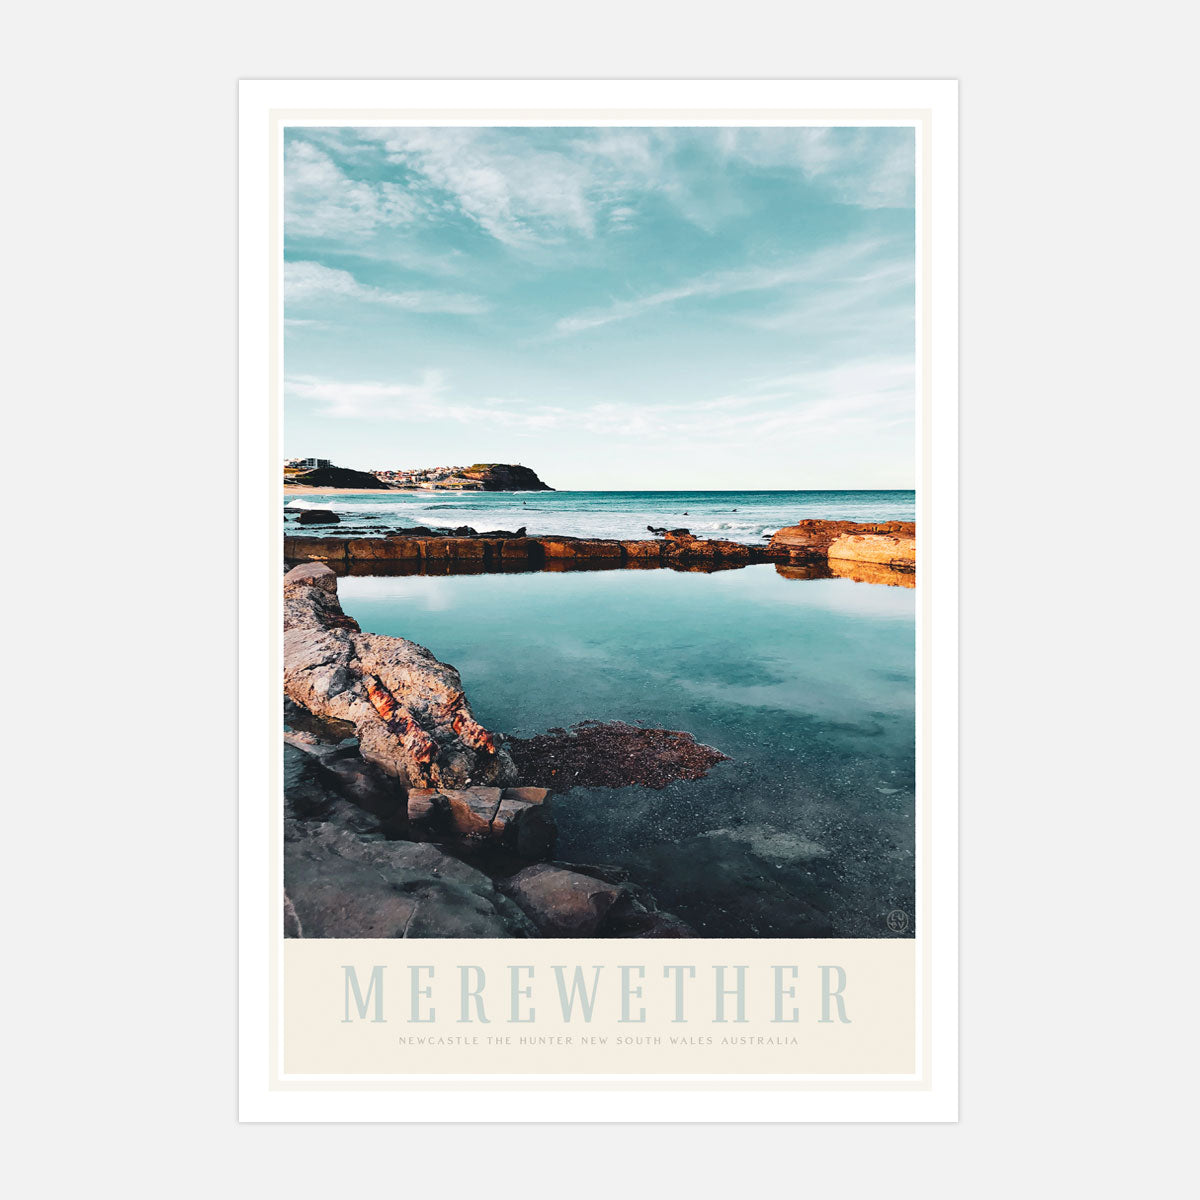 Merewether Beach vintage retro travel print from Places We Luv